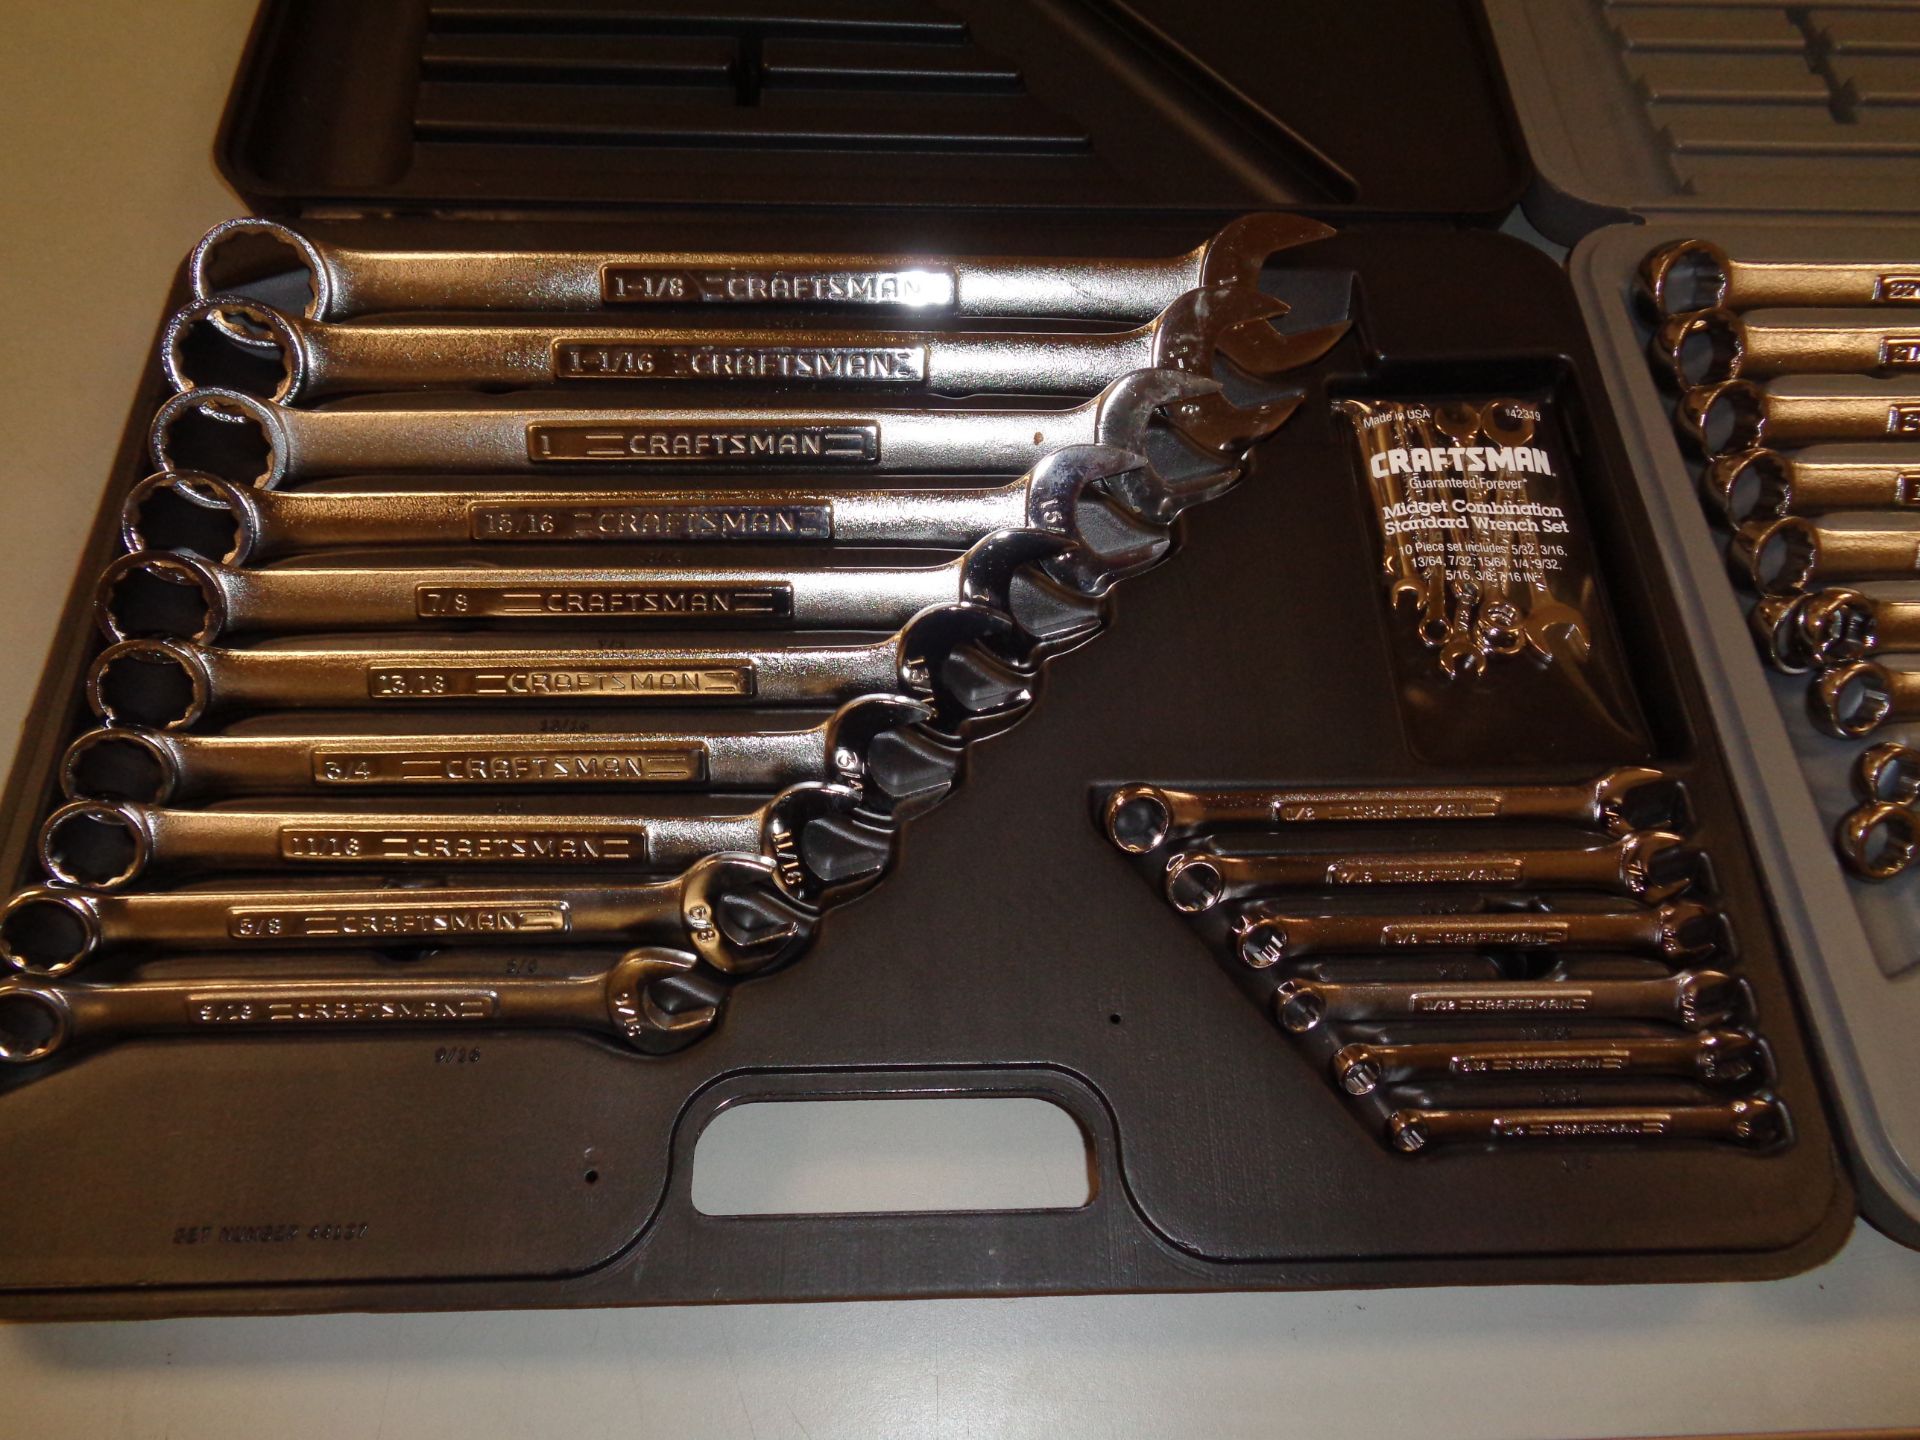 Set of 2 Craftsman 26 Piece Wrench Sets - Metric and Standard - Image 5 of 9